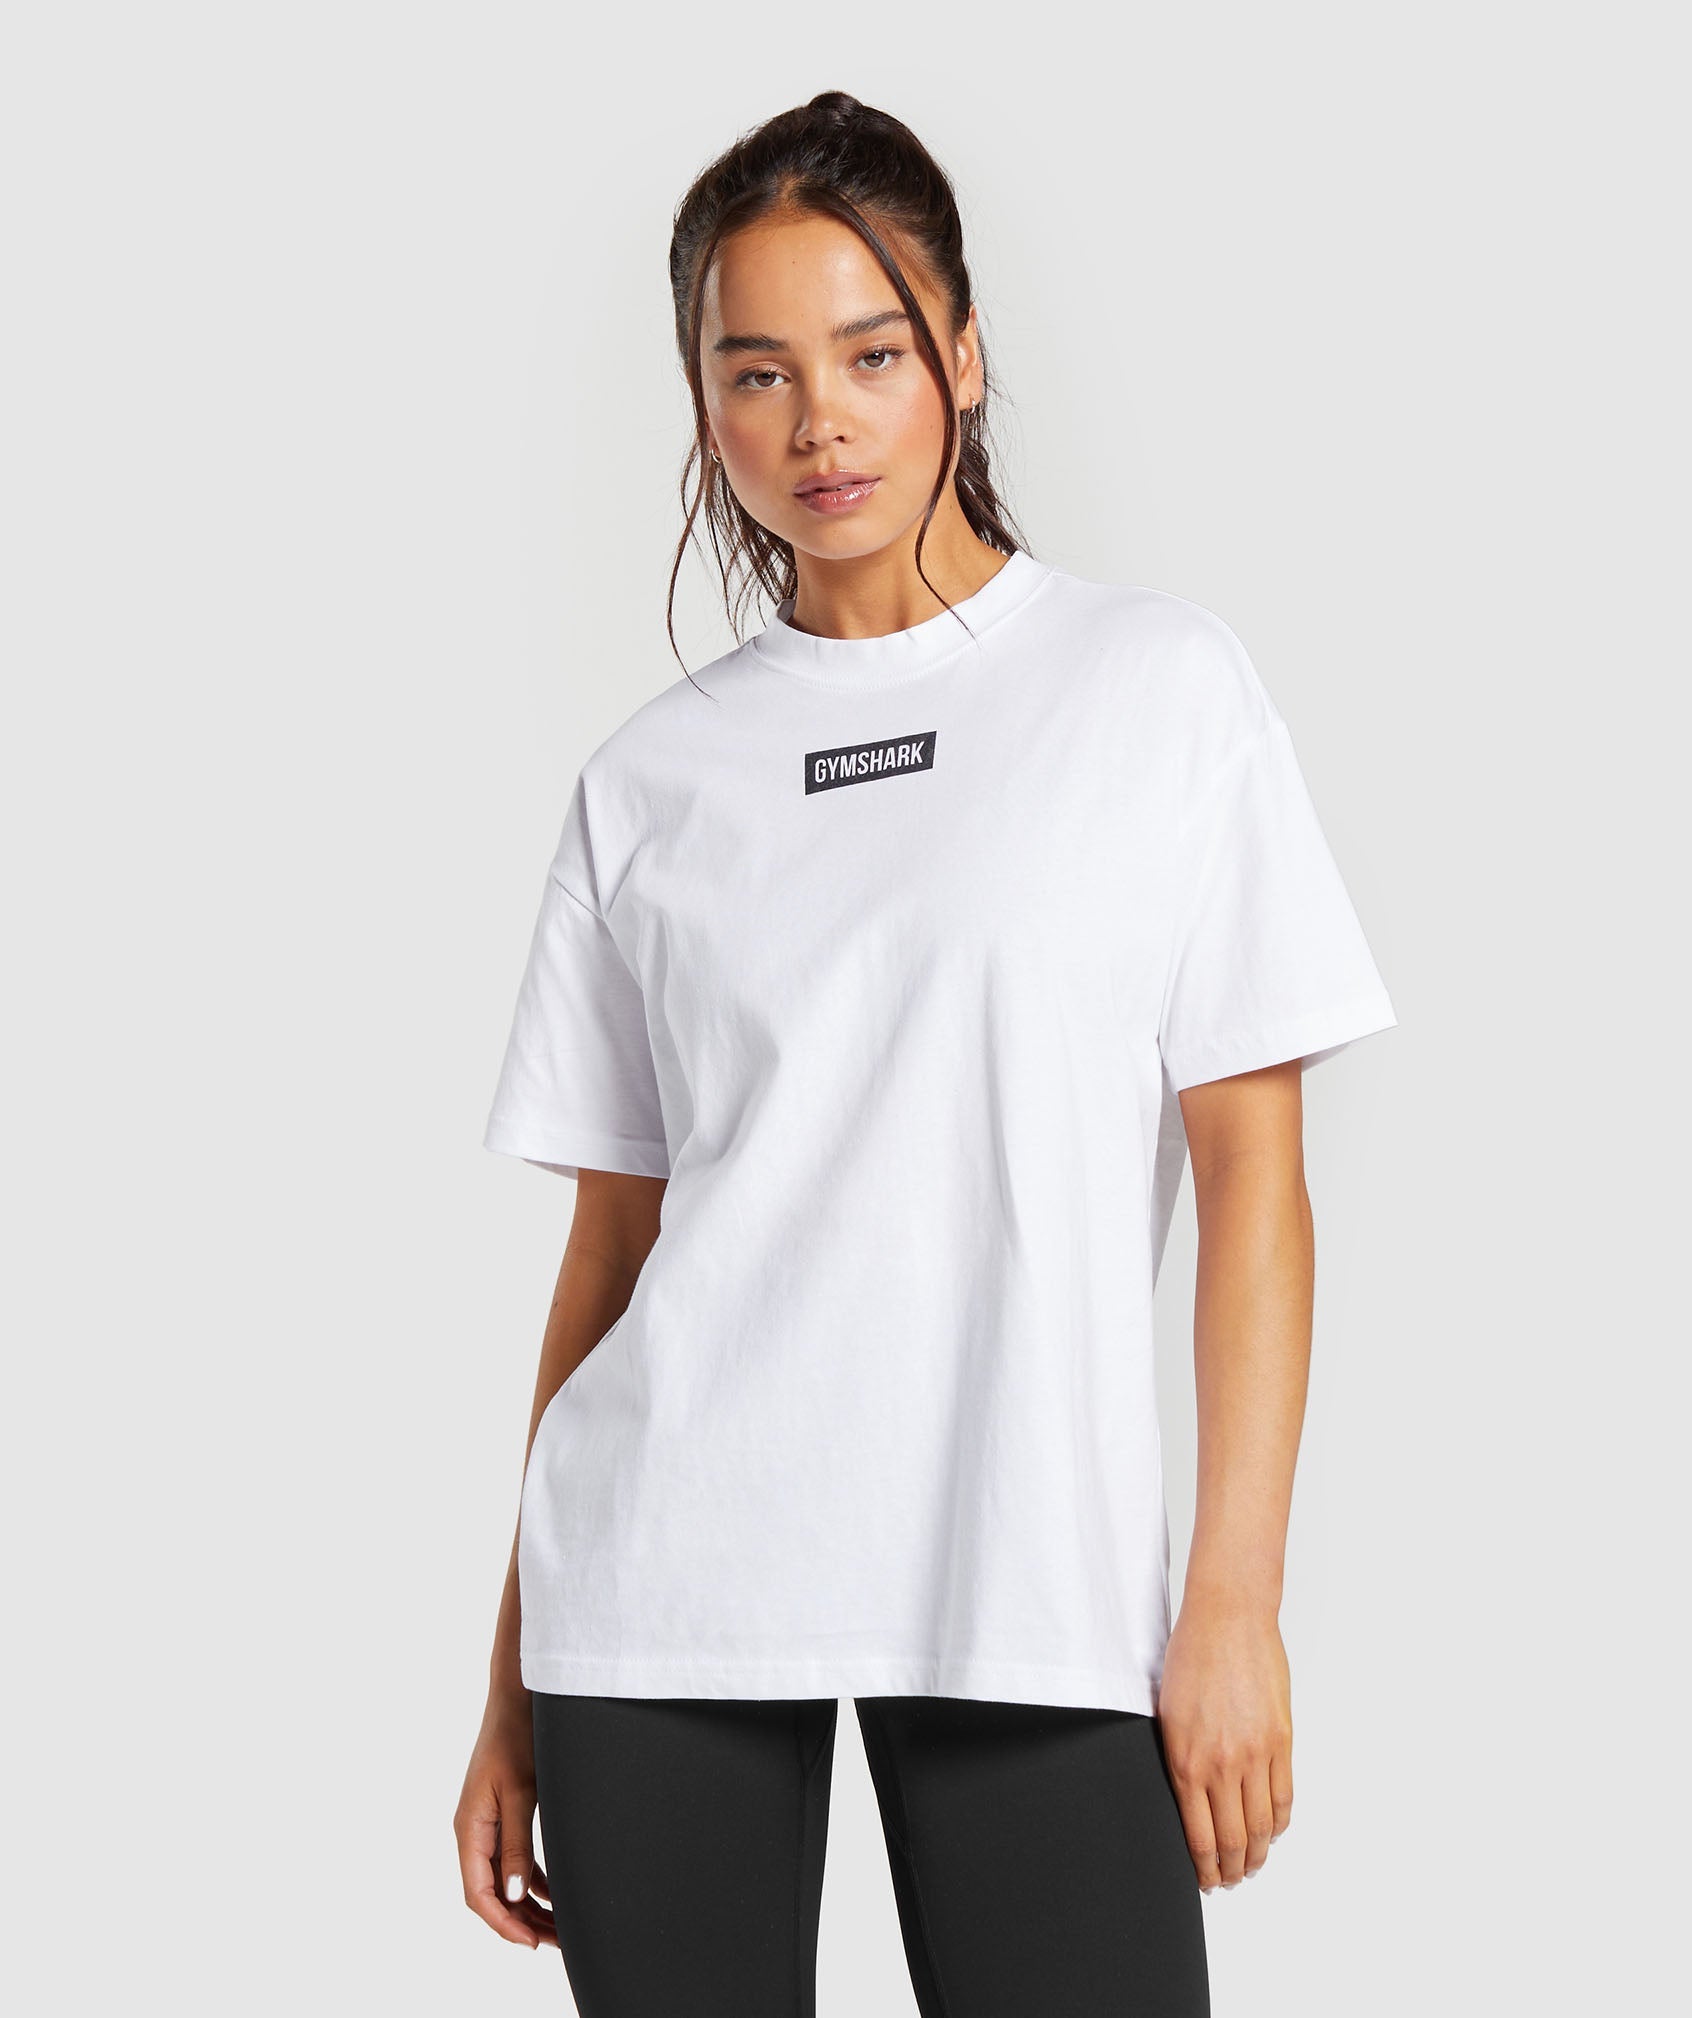 Block Oversized T-Shirt in White is out of stock